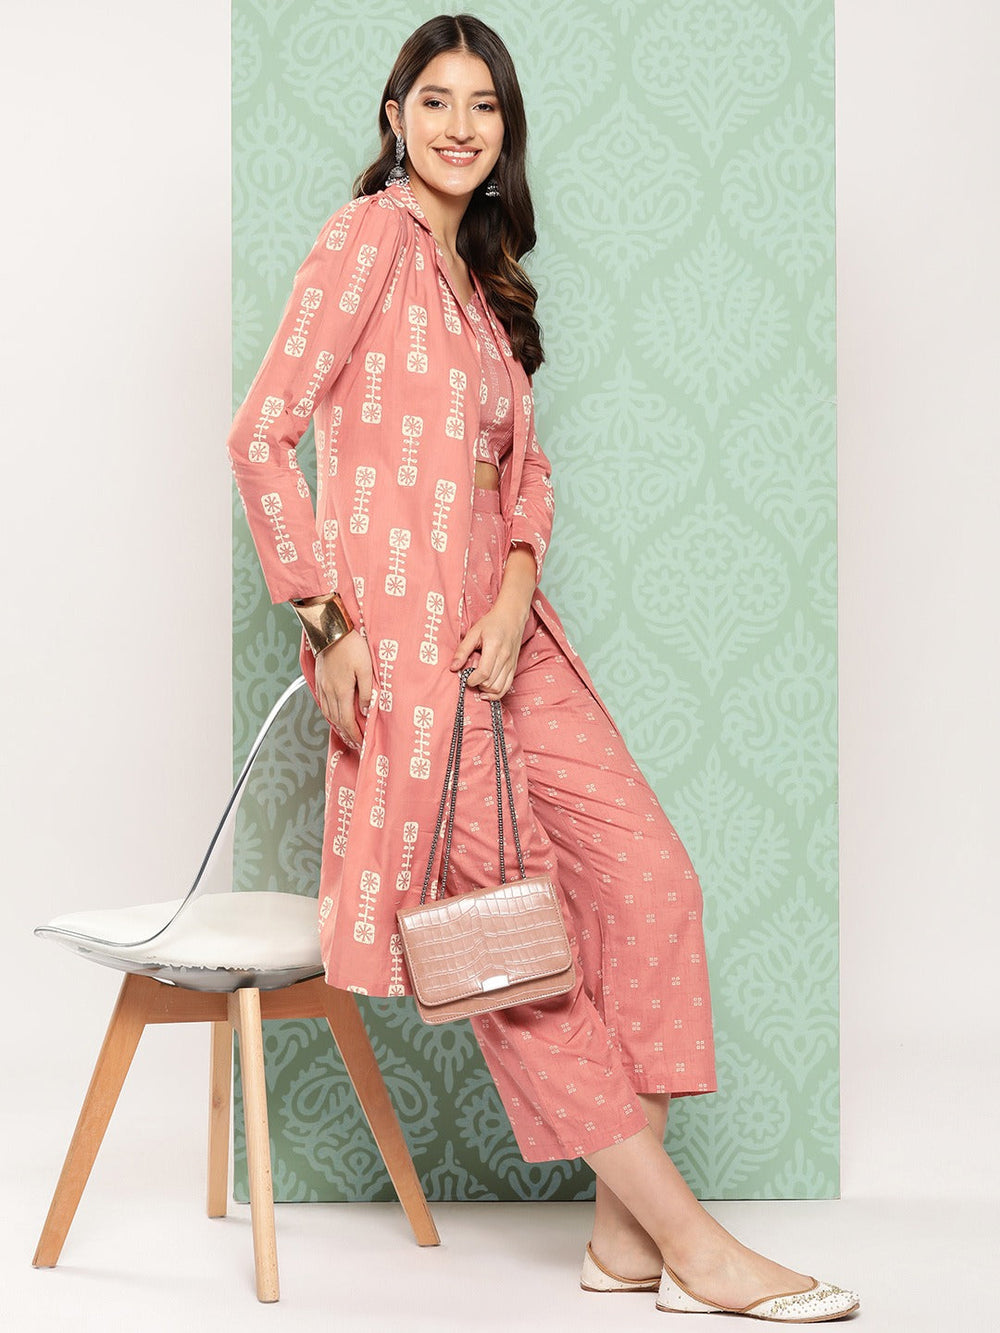 Peach Printed Cotton Top with Trousers with Shrug-Yufta Store-1520CRDPCS